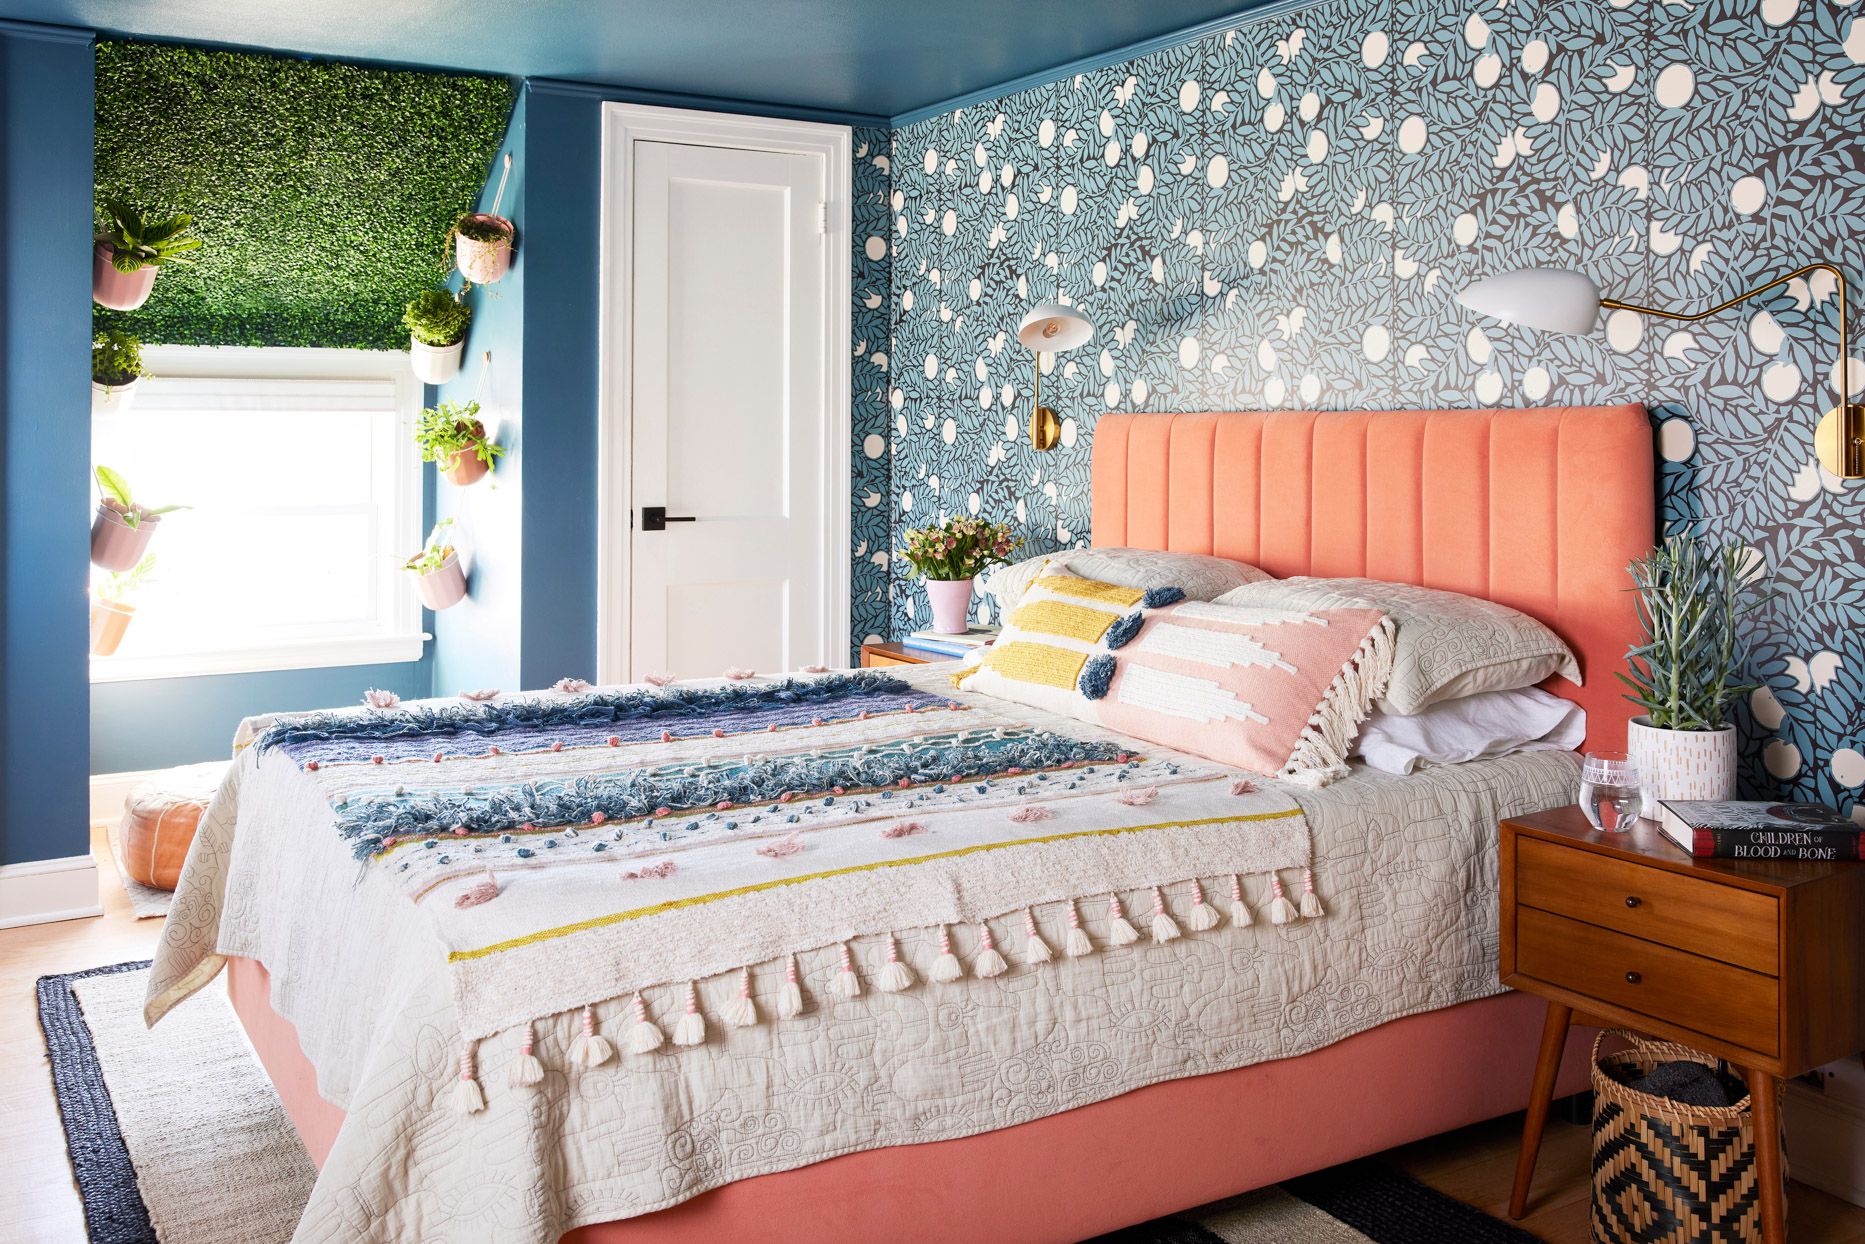 15 Must-Have Cotton Bed Linen Designs for a Stylish Bedroom